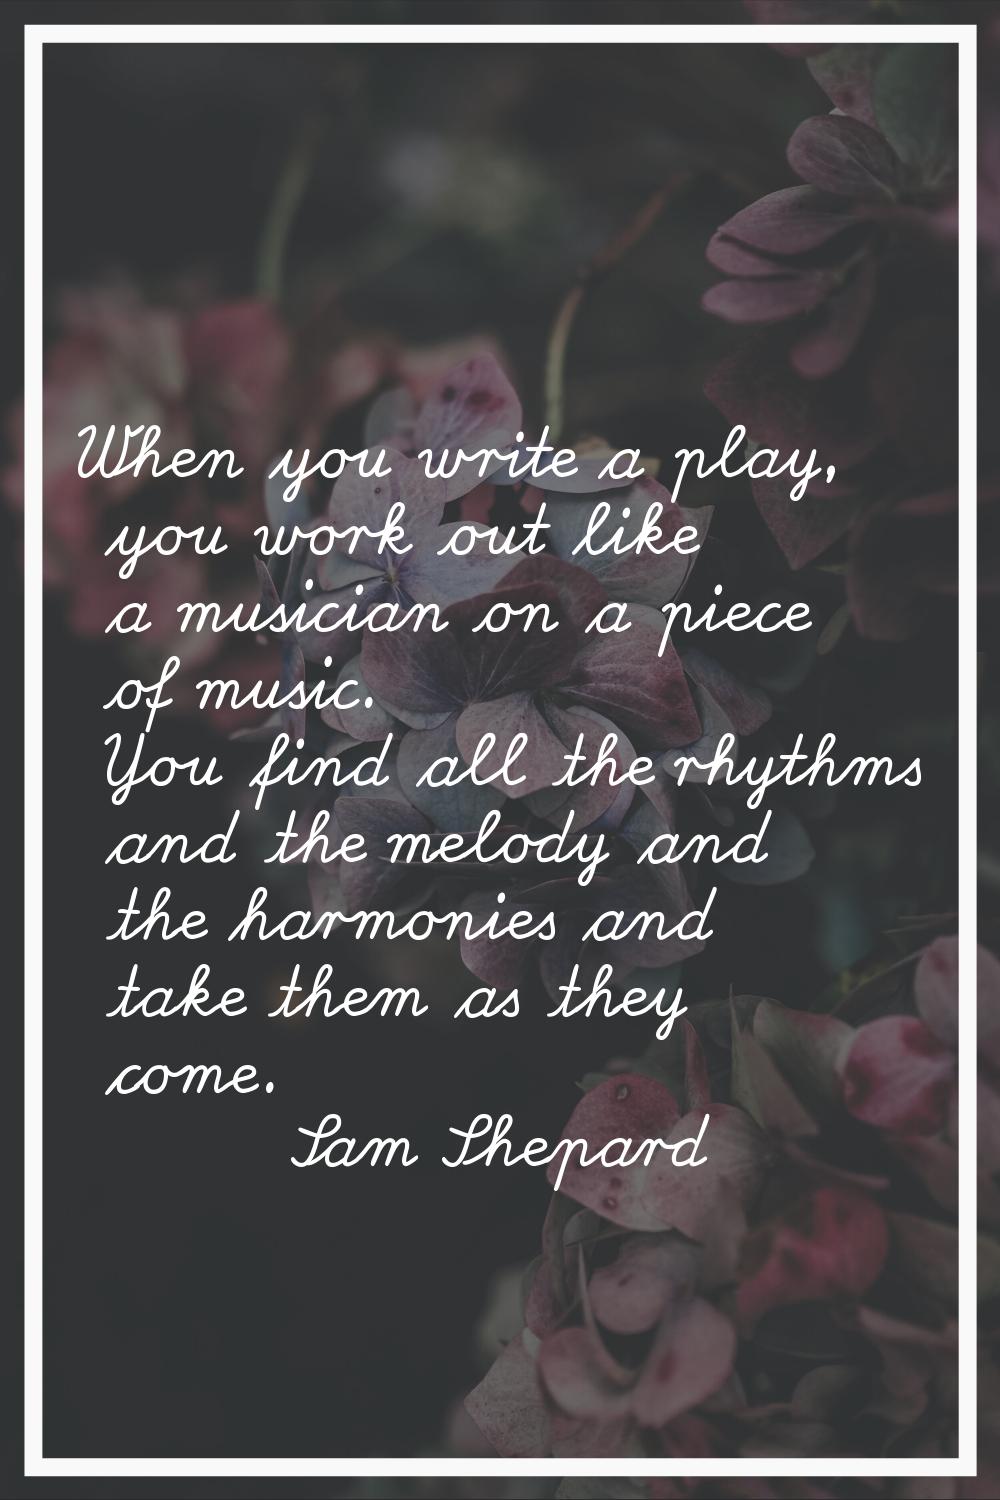 When you write a play, you work out like a musician on a piece of music. You find all the rhythms a